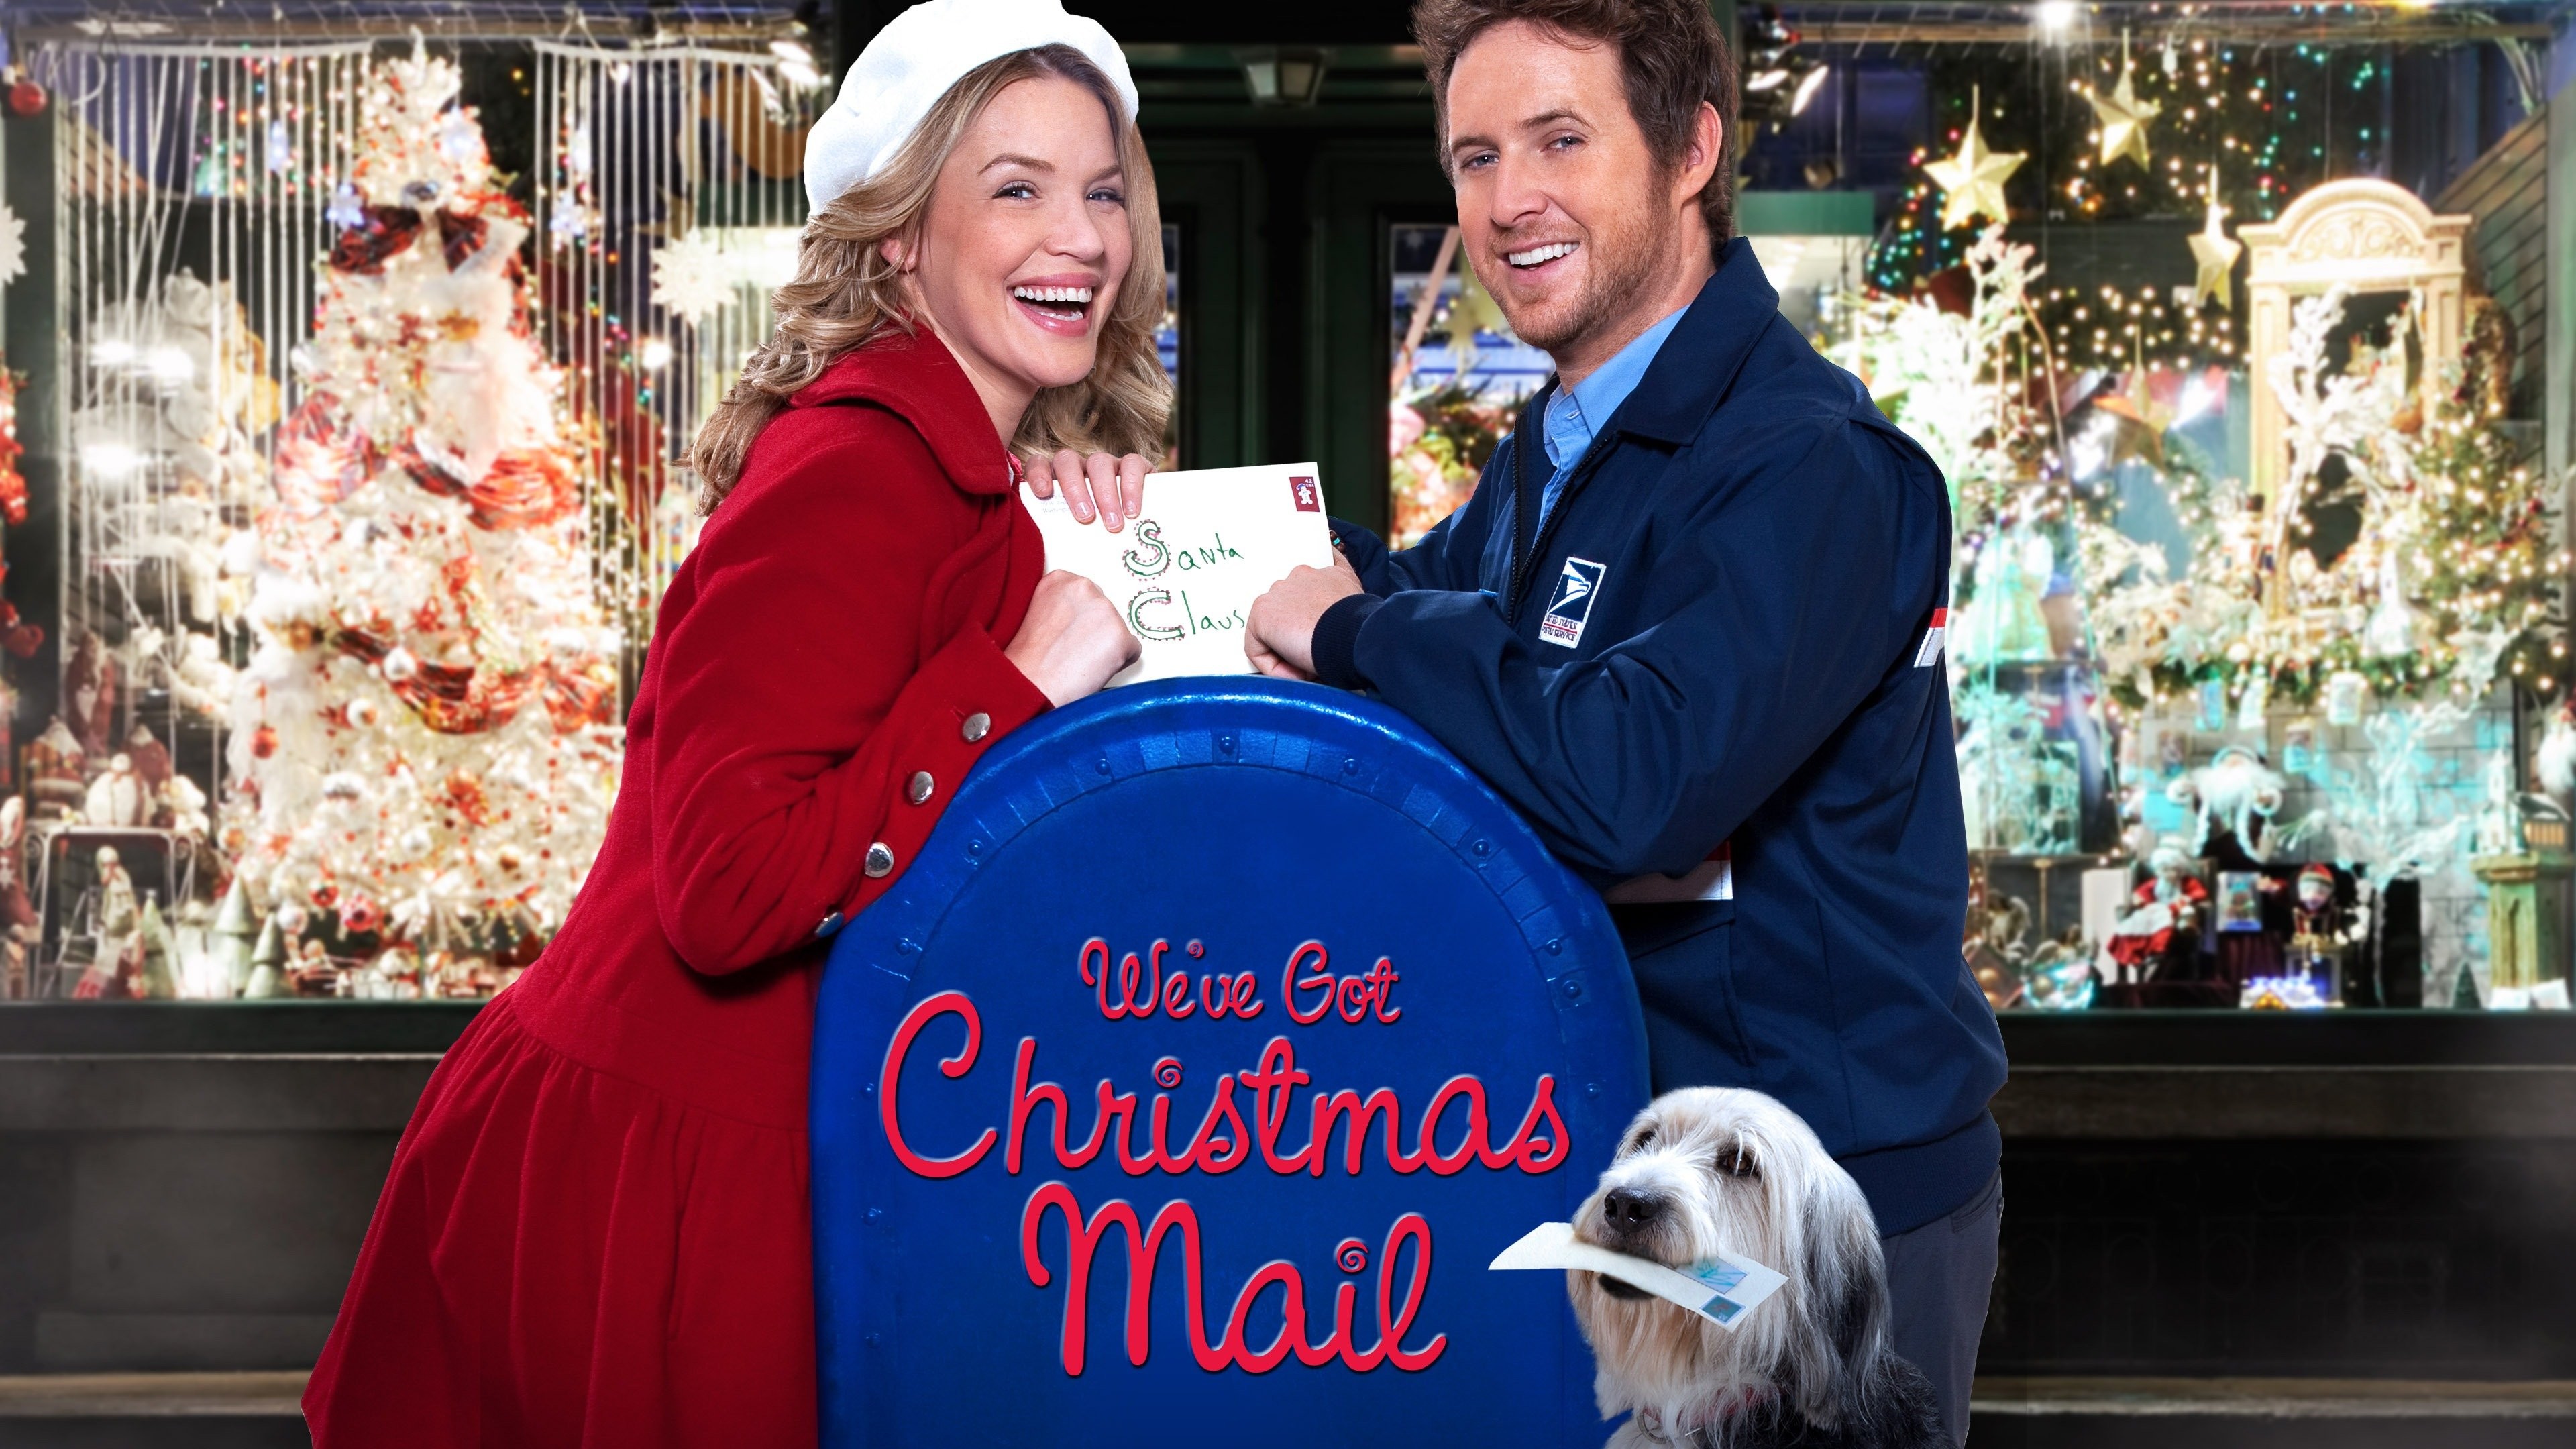 Christmas Mail - Rotten Tomatoes